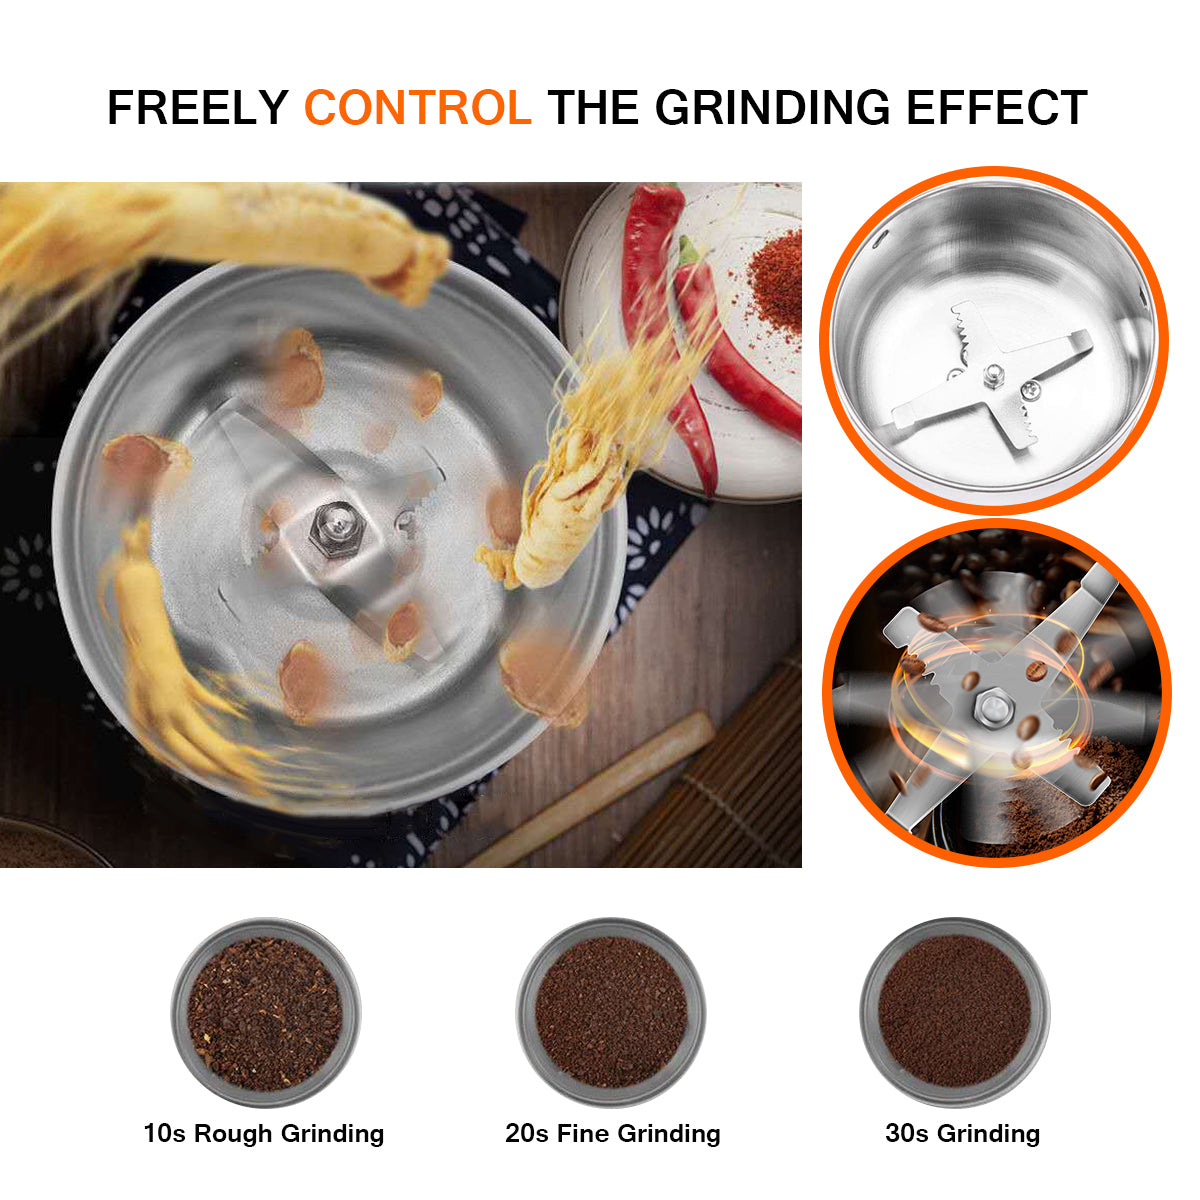 Portable Electric Cereals Grain Grinder Smash Machine for Nut Coffee Bean Spice Grinding